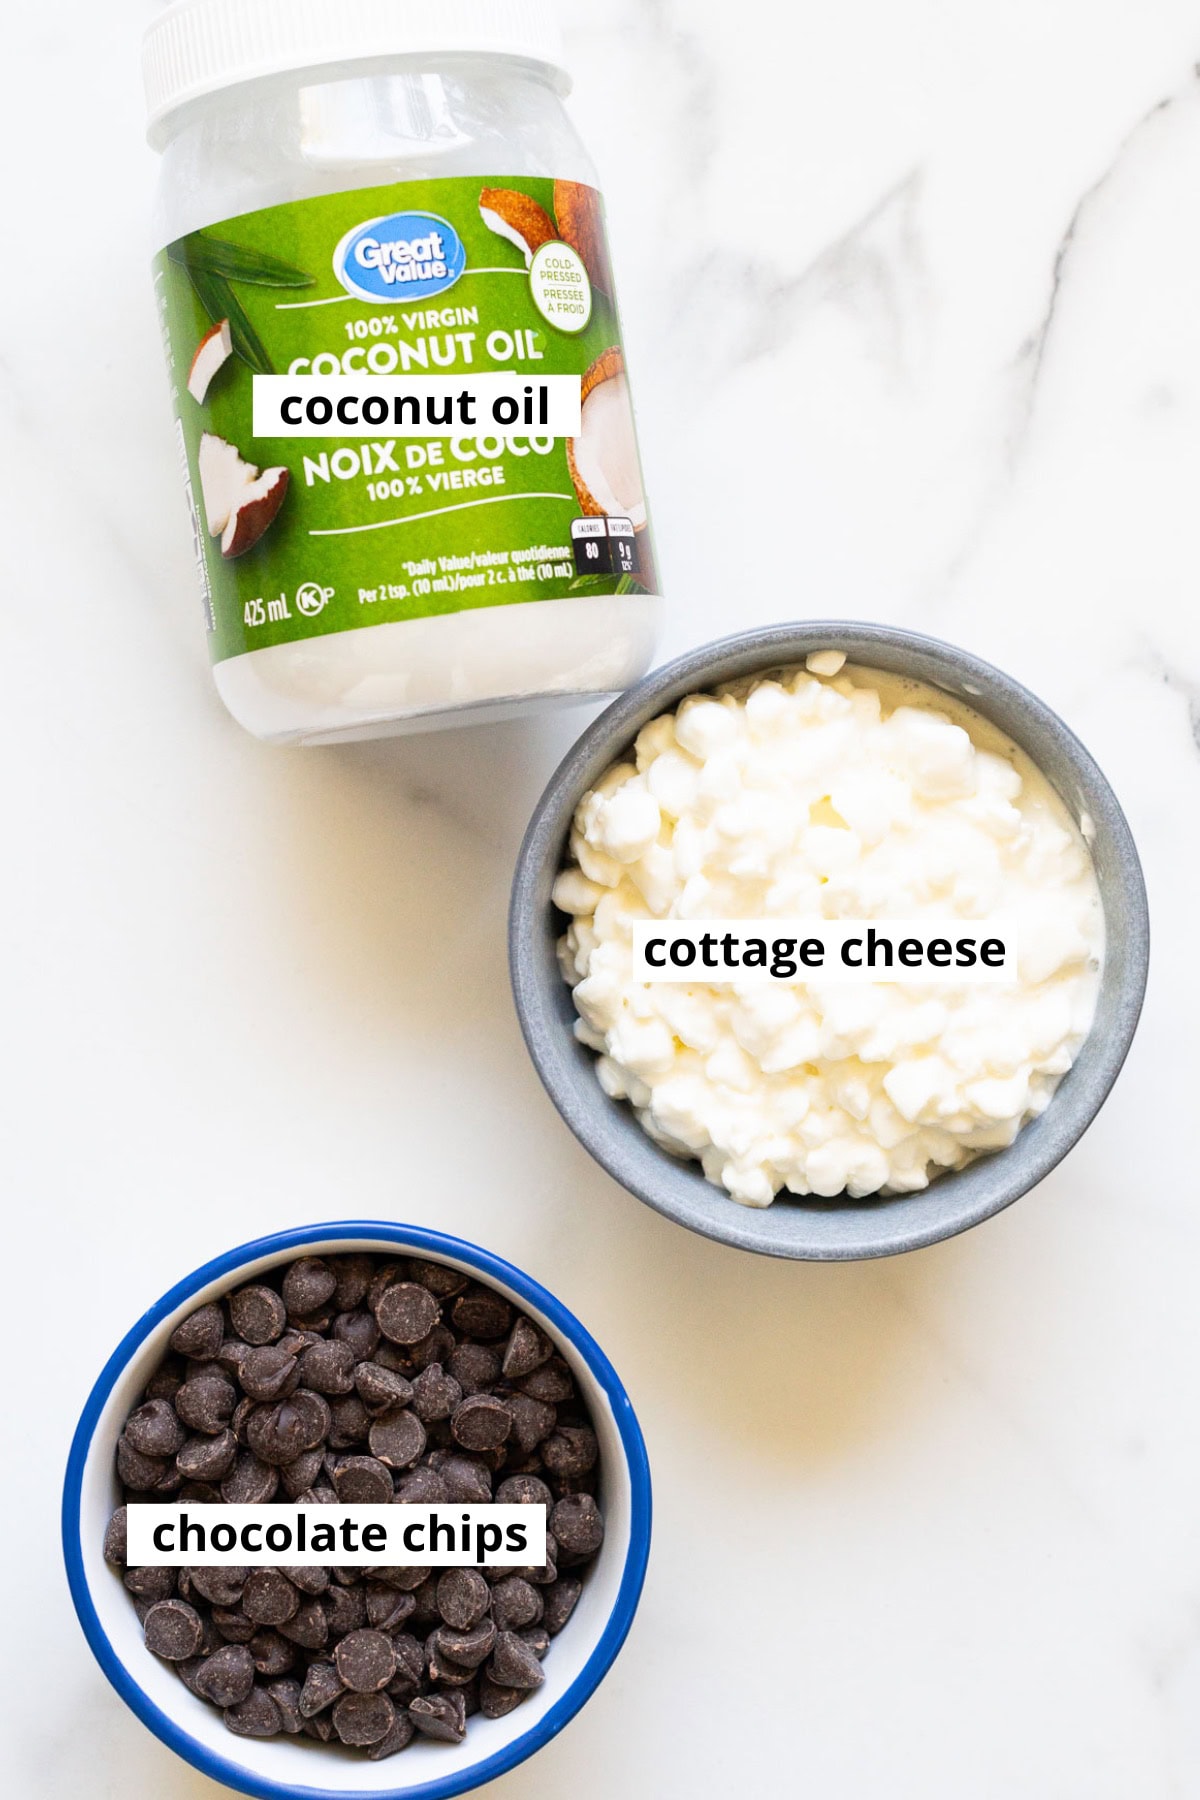 Coconut oil, chocolate chips, cottage cheese.